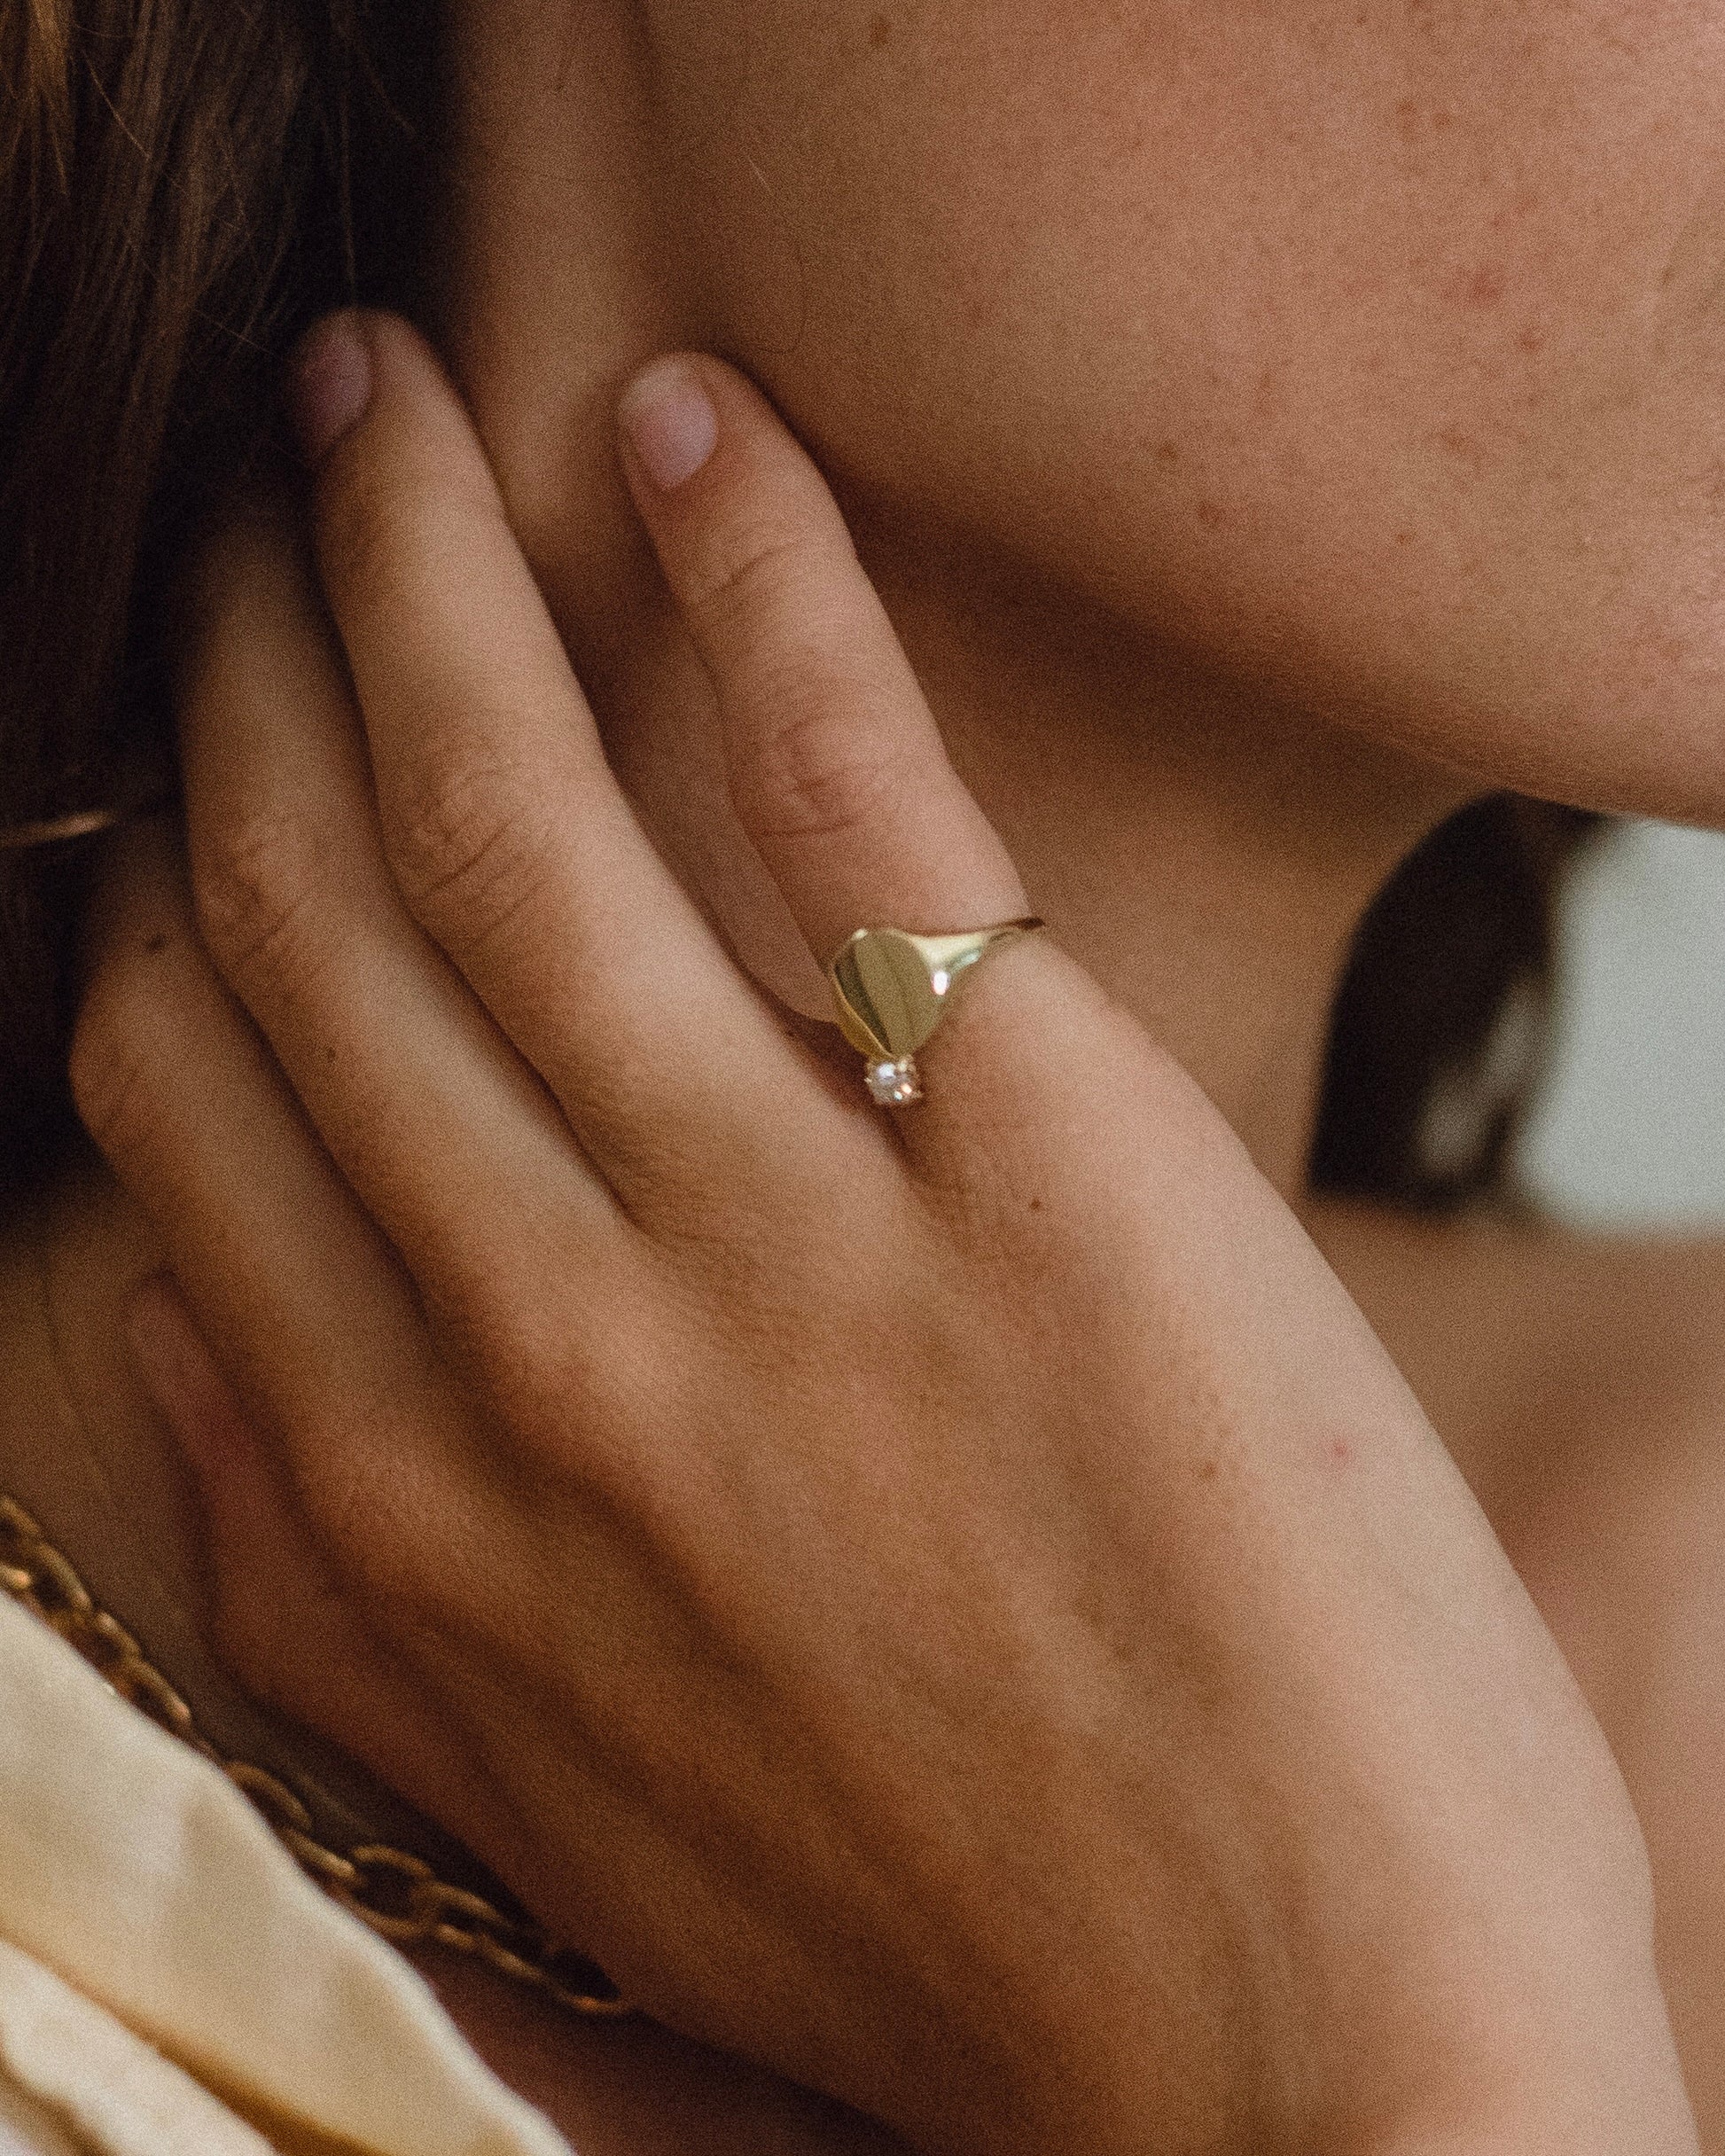 The Franca Floating Diamond Ring - Also, Freedom